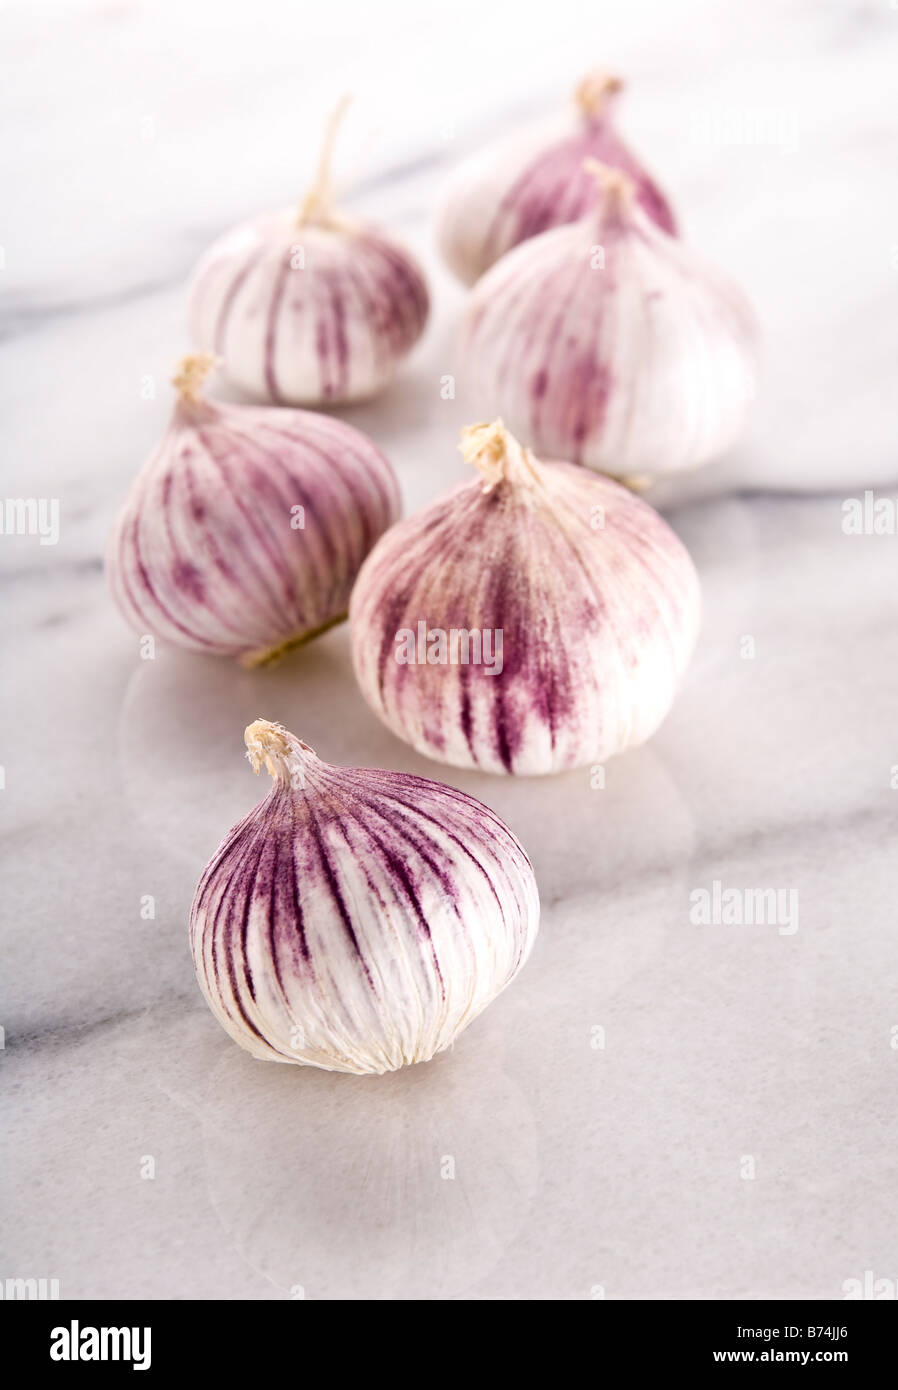 Five heads of Chinese garlic. Unlike normal garlic, Chinese garlic is one complete bulb - ideal if you cook a lot ! Stock Photo